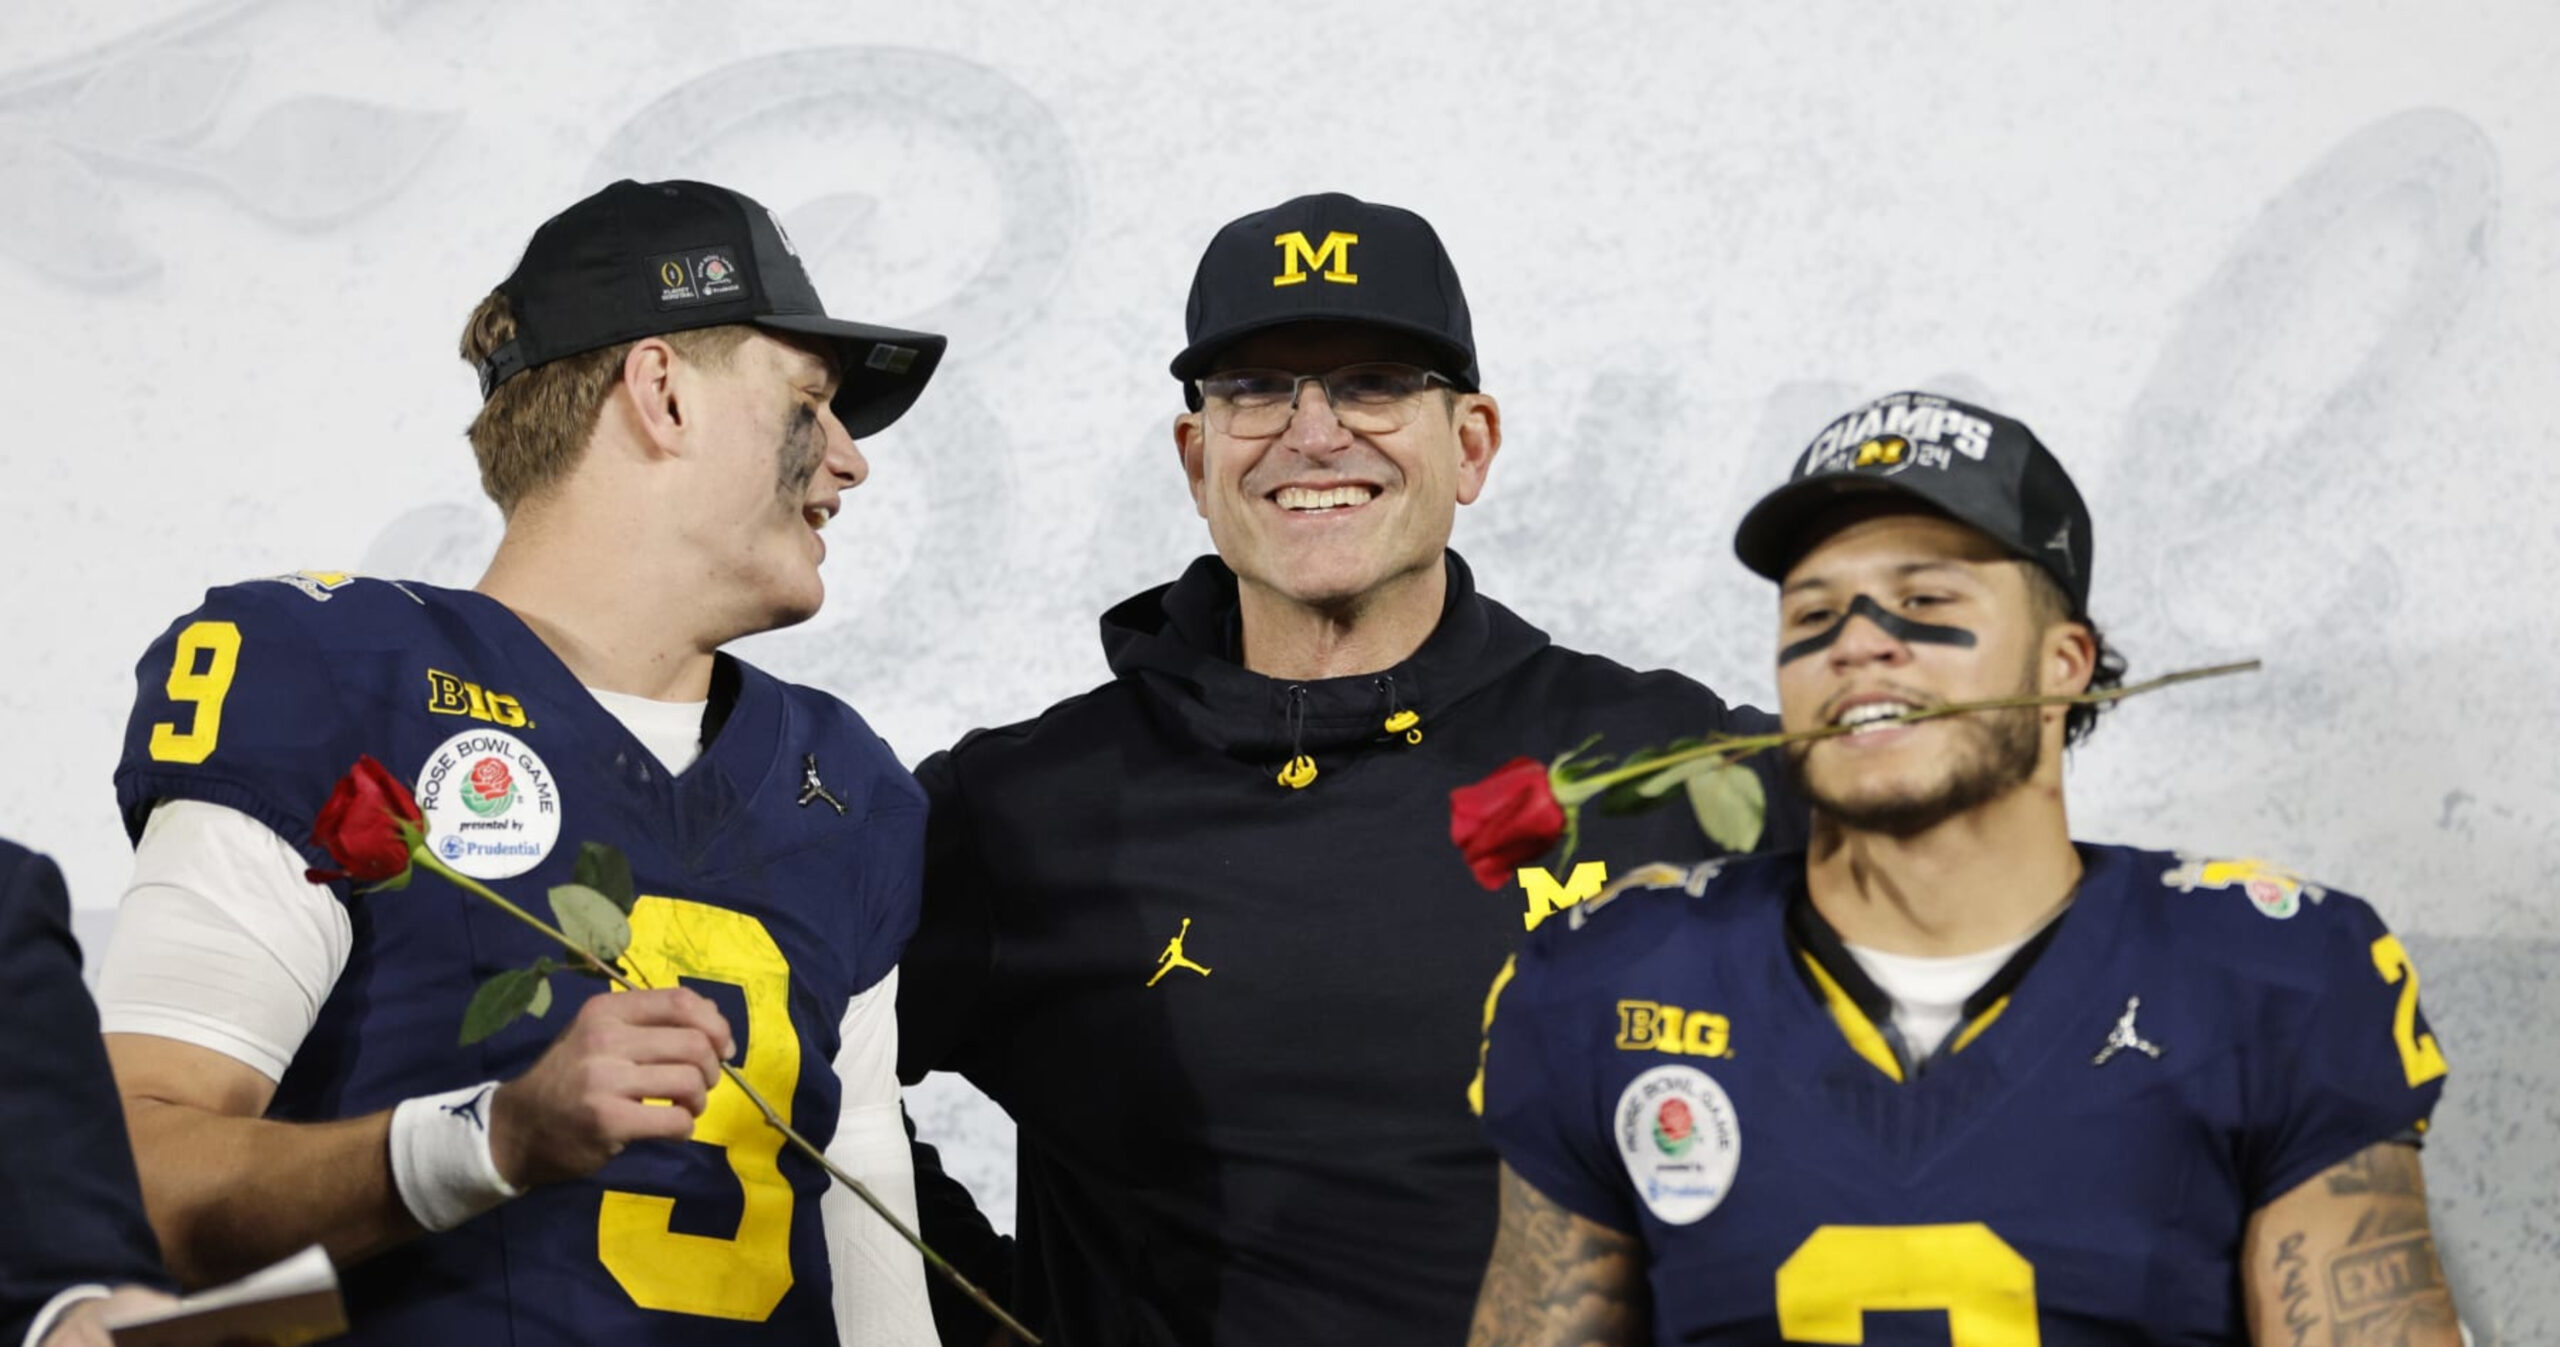 NFL Rumors: ‘Jim Harbaugh’s Chargers Will Attain What It Takes to’ Draft Michigan’s Corum